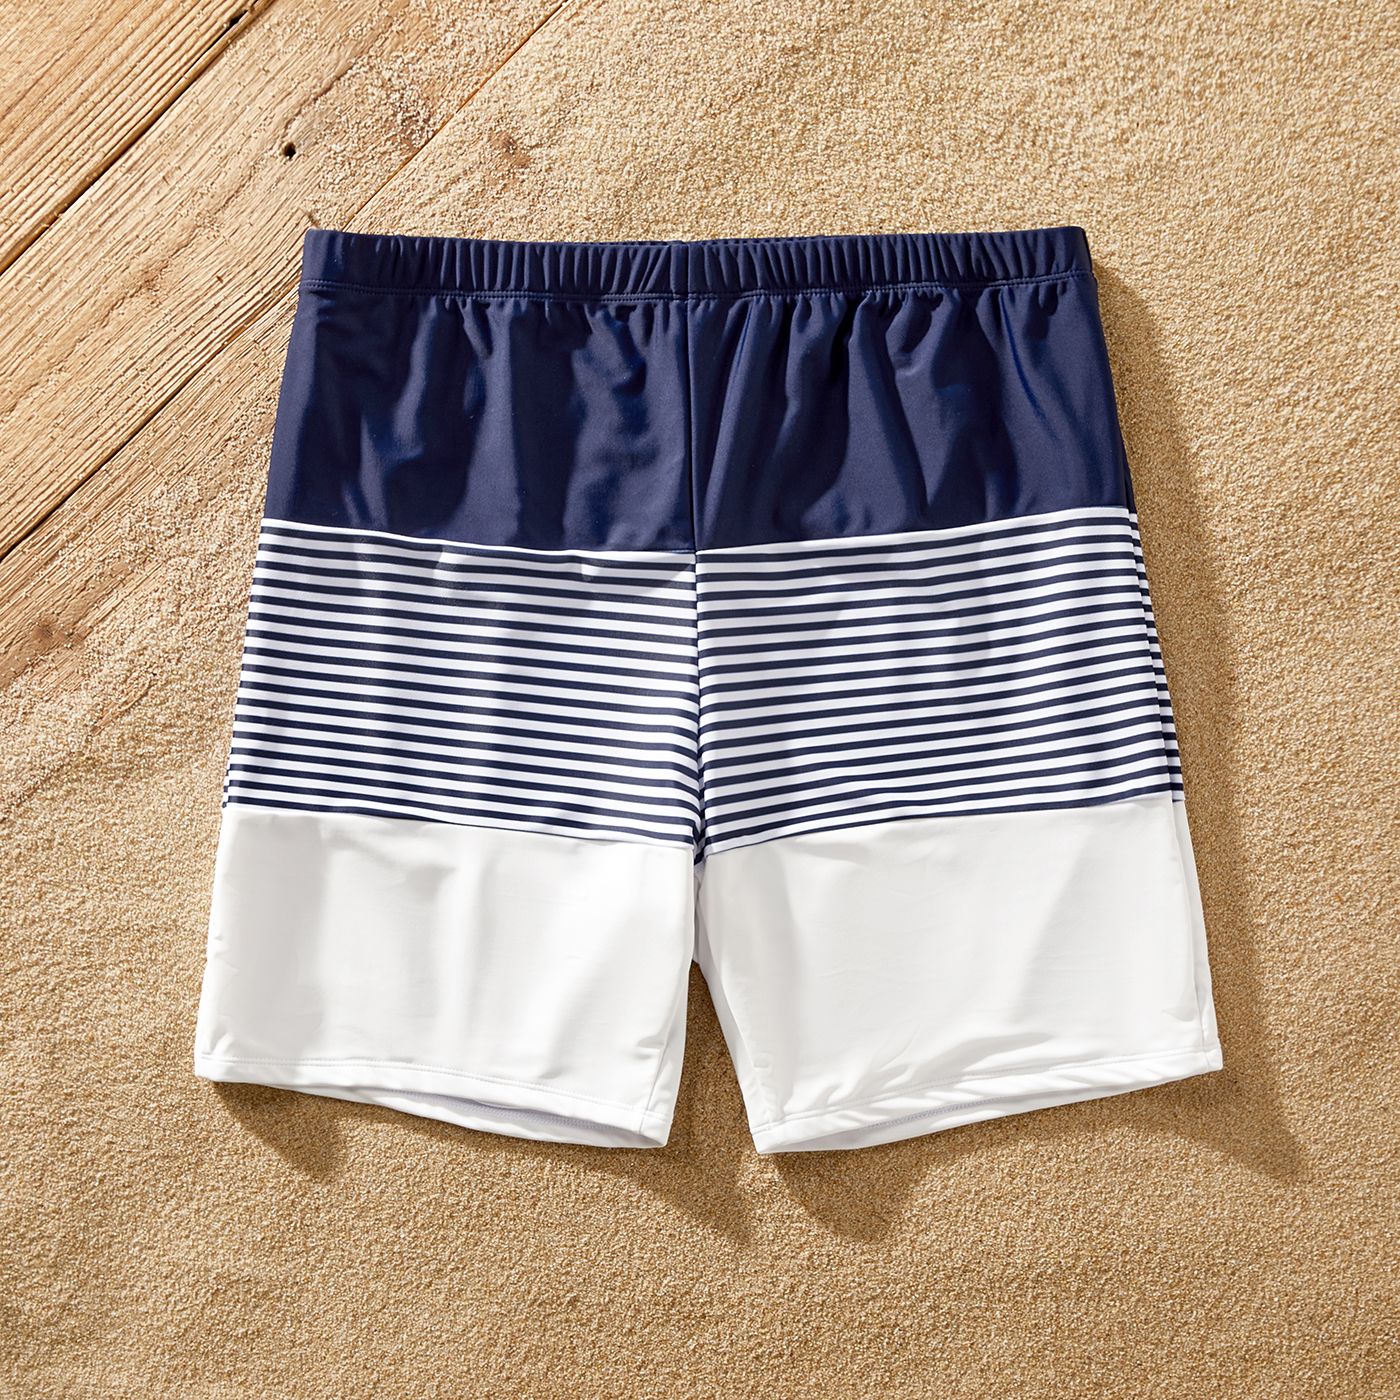 Family Matching Pinstriped Colorblock One Shoulder One-piece Swimsuit Or Swim Trunks Shorts